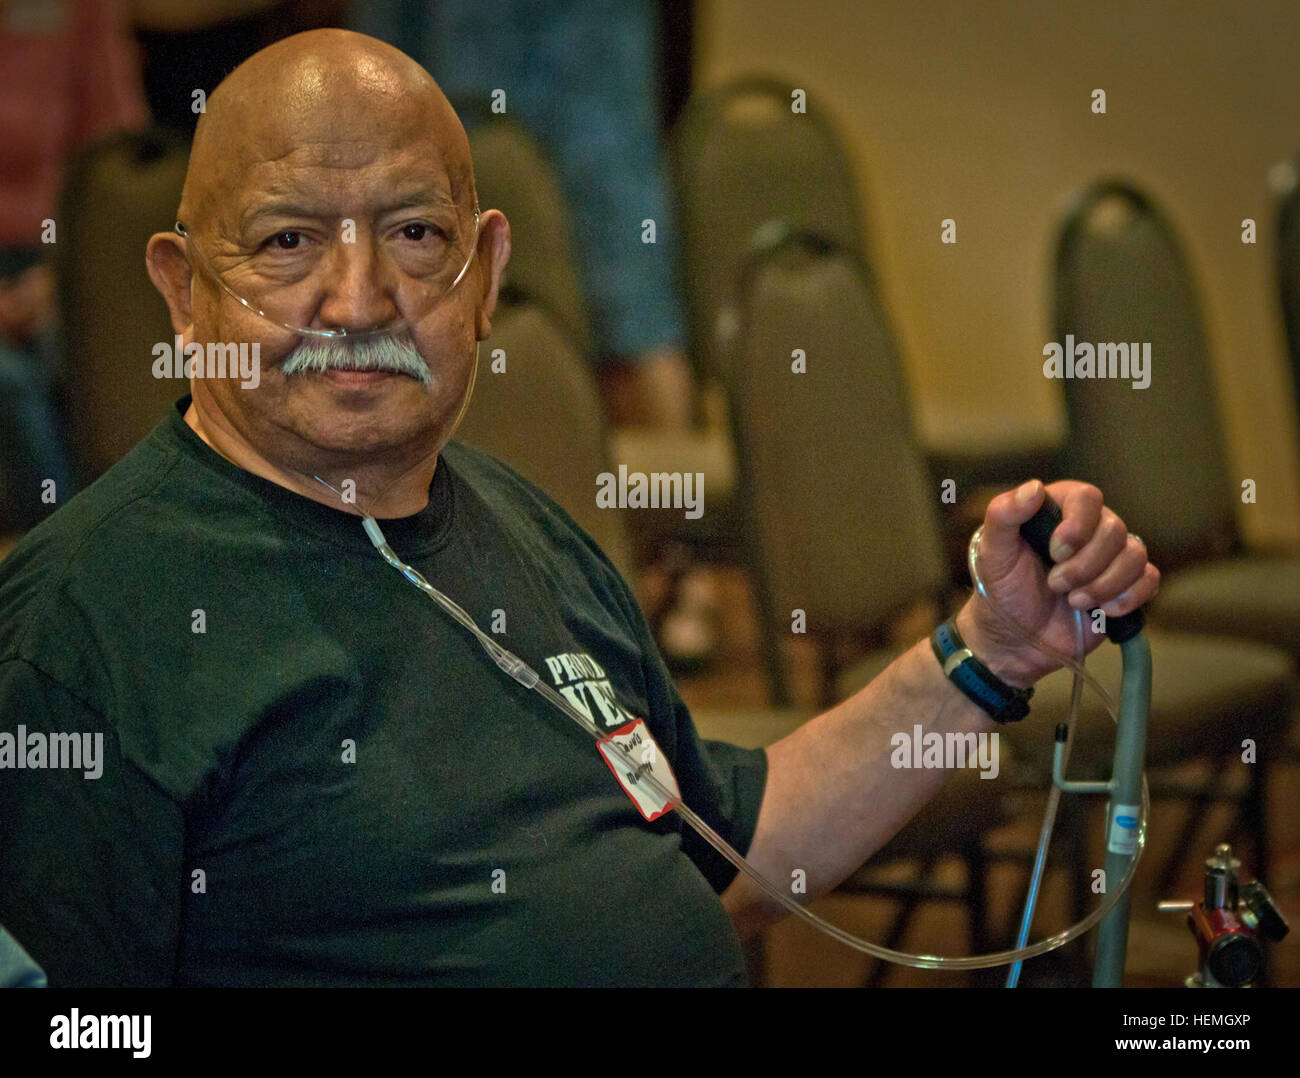 KILLEEN, Texas -- Vietnam veteran Dennis Montoya, who served combat tours in 1967 and 1968 as a specialist for Company D, 1st Battalion, 5th Cavalry Regiment, 1st Cavalry Division, takes a break during the third reunion of Vietnam Veterans from 'The D 1-5' on April 17, 2013. (U.S. Army photo by Sgt. Ken Scar, 7th Mobile Public Affairs Detachment) 1st Bn., 5th Cav. soldiers host their Vietnam-era brothers on Fort Hood 130417-A-ZU930-028 Stock Photo